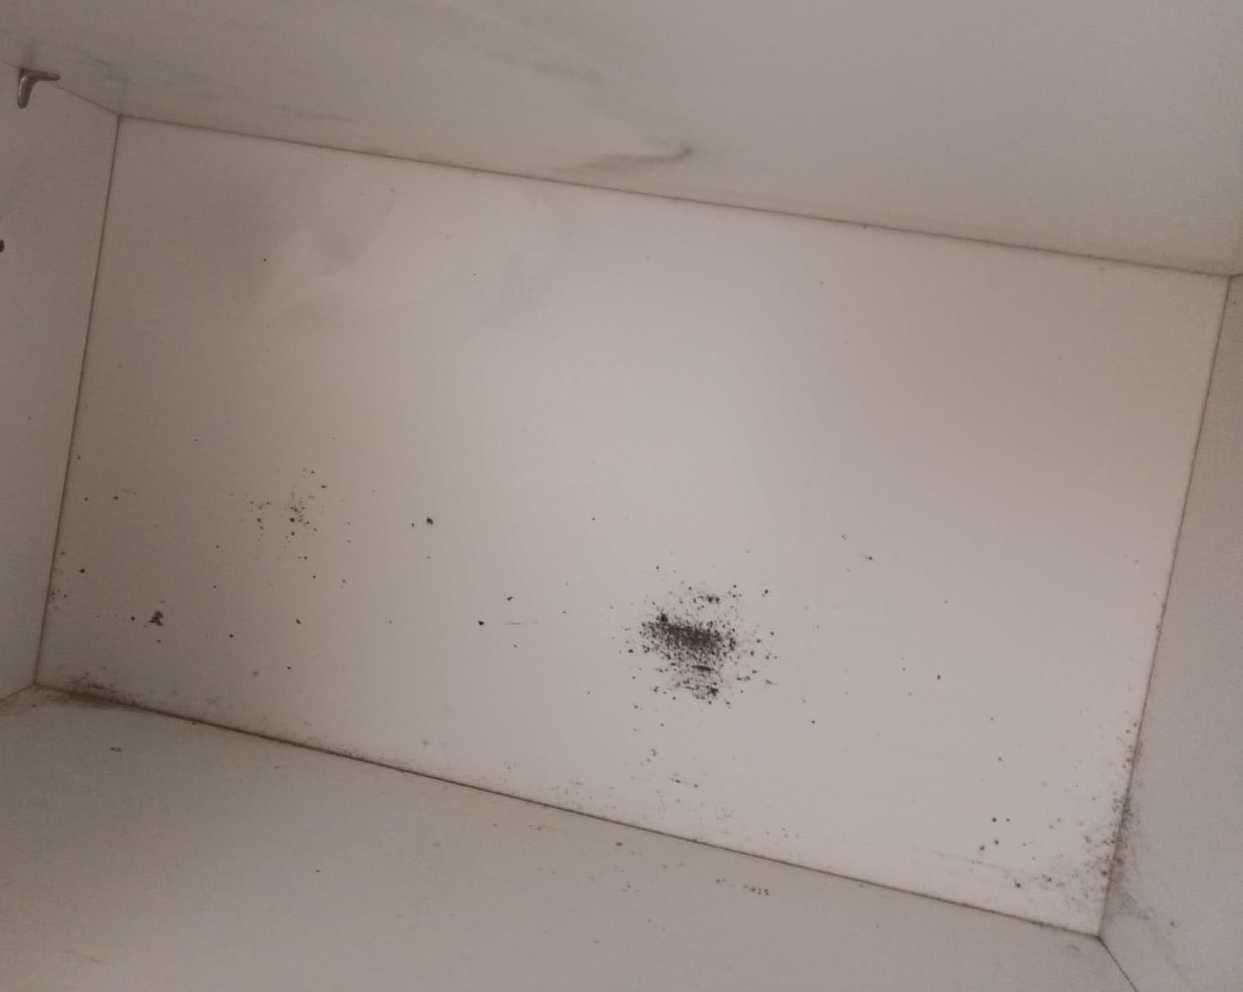 Mould spotted in the cabinet of the Rochester flat. Picture: Chelsea Hazelwood